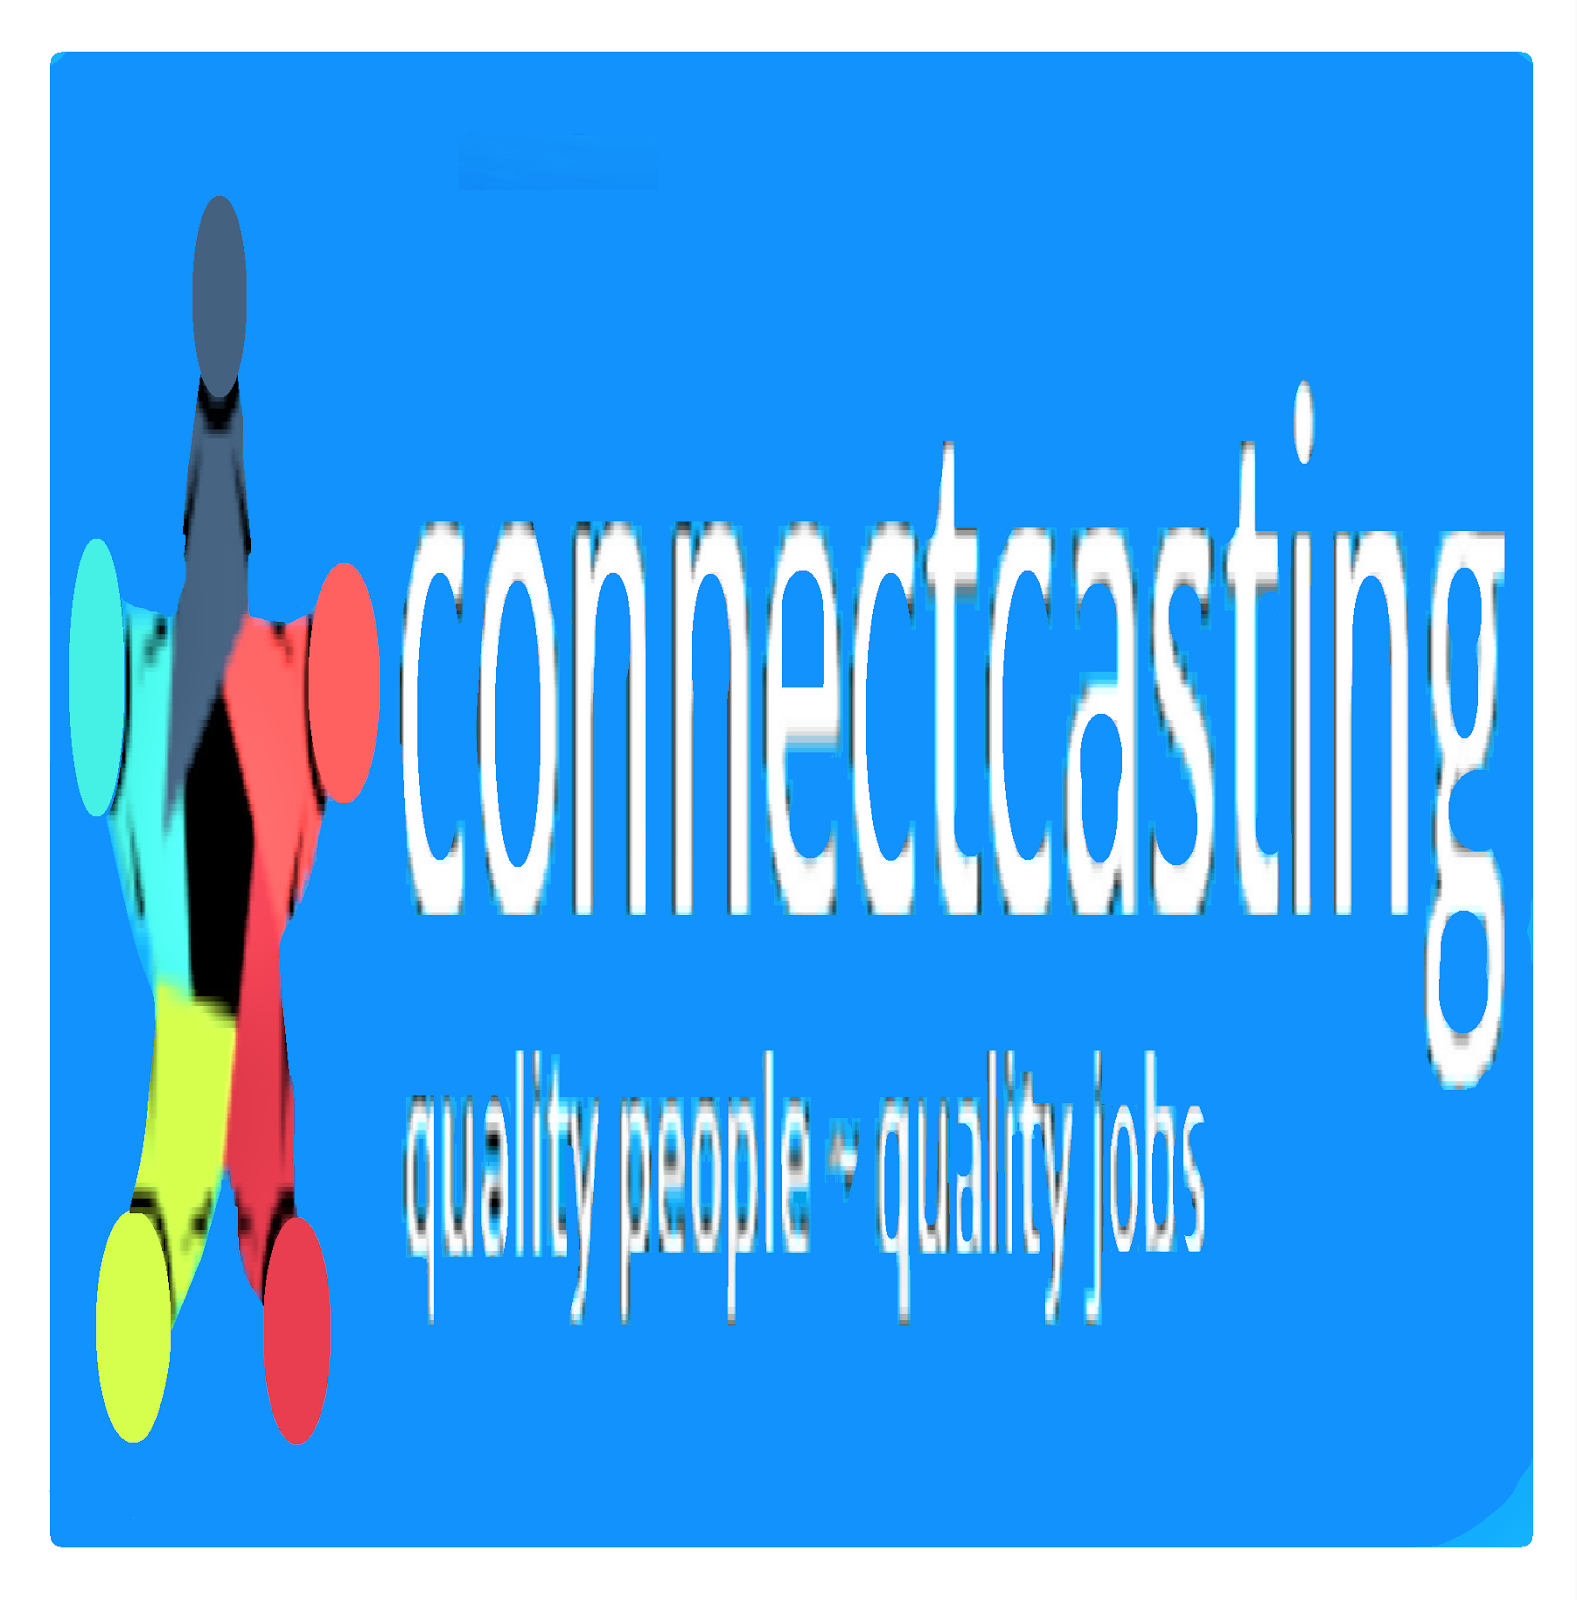 ConnectCasting